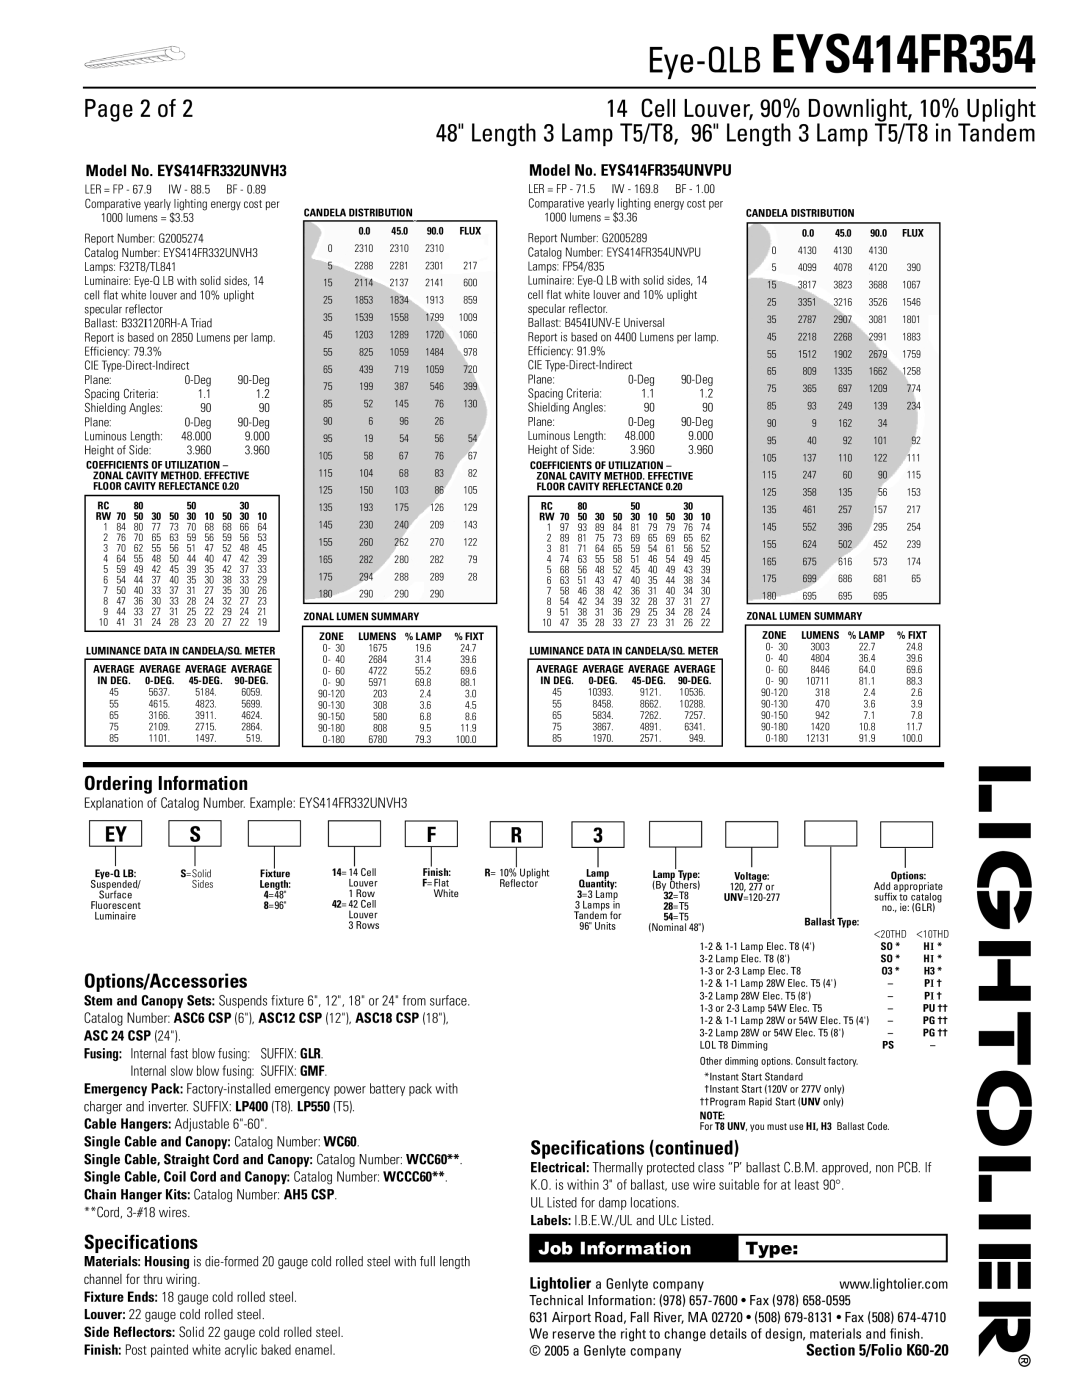 Lightolier Page 2 of, Ordering Information, Options/Accessories, Specifications continued, Eye-QLB EYS414FR354, Type 